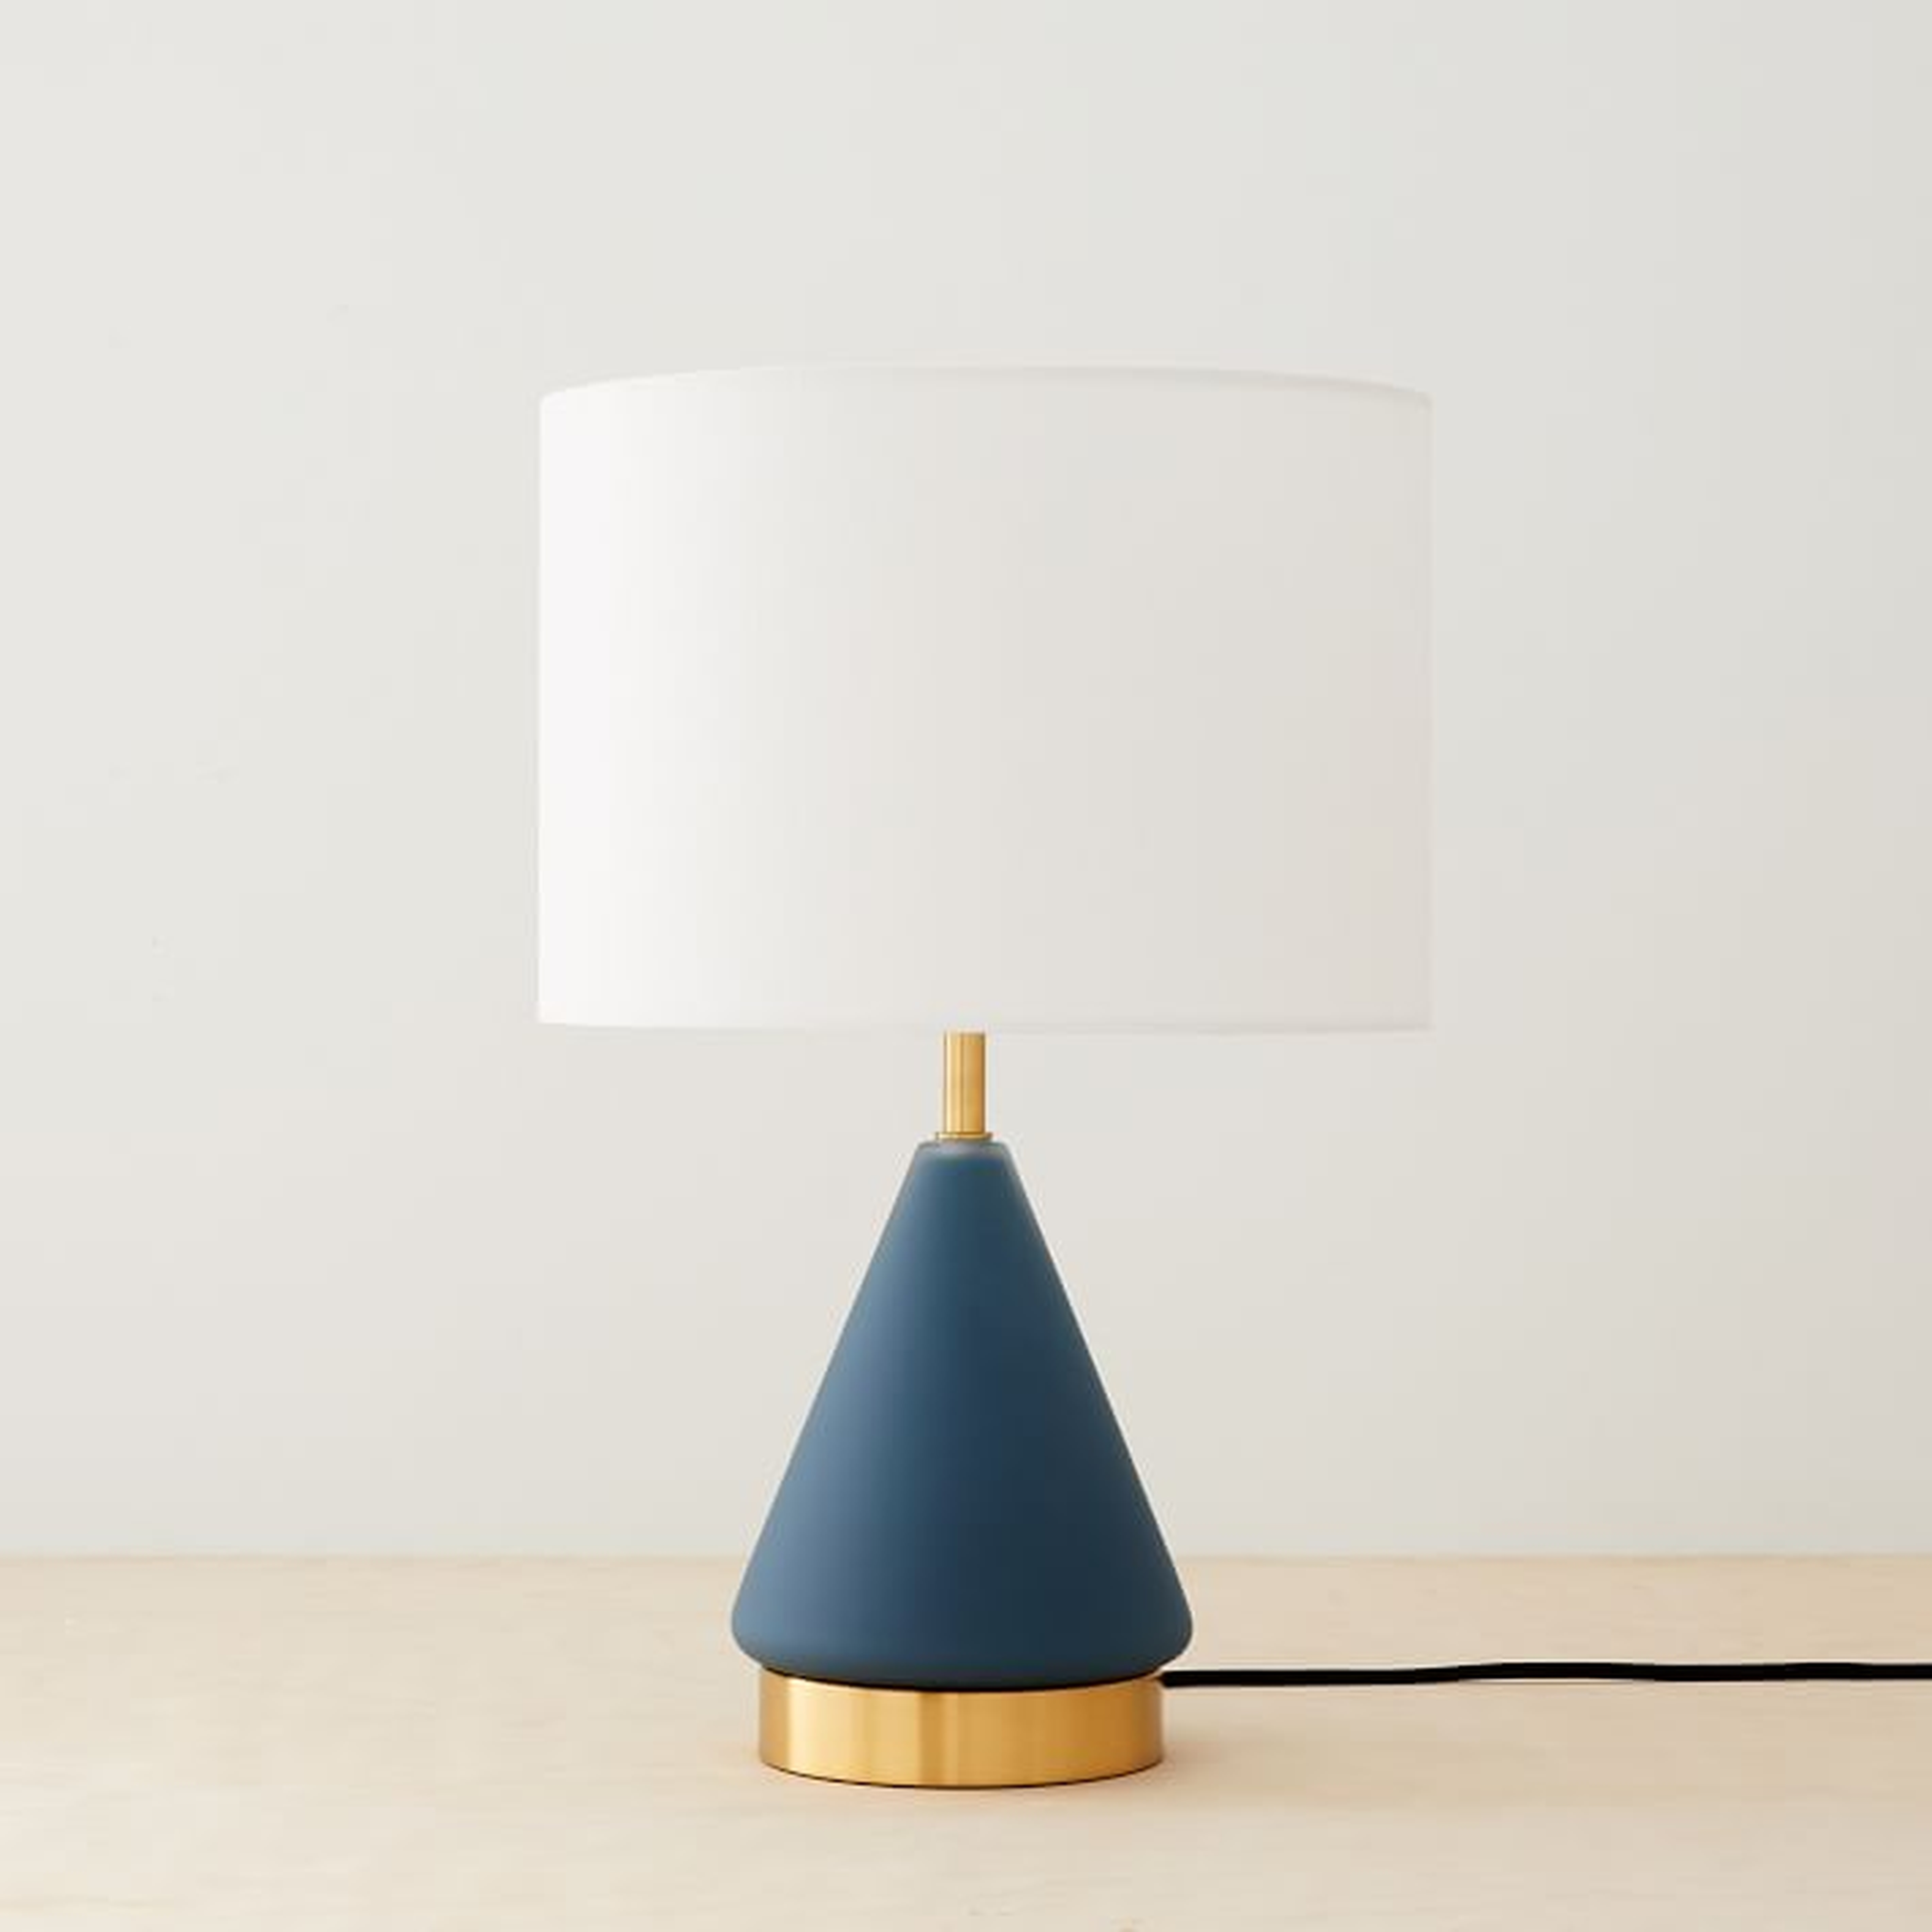 Metalized Glass Table Lamp + USB, Small, Petrol Blue, Antique Brass, Set of 2 - West Elm